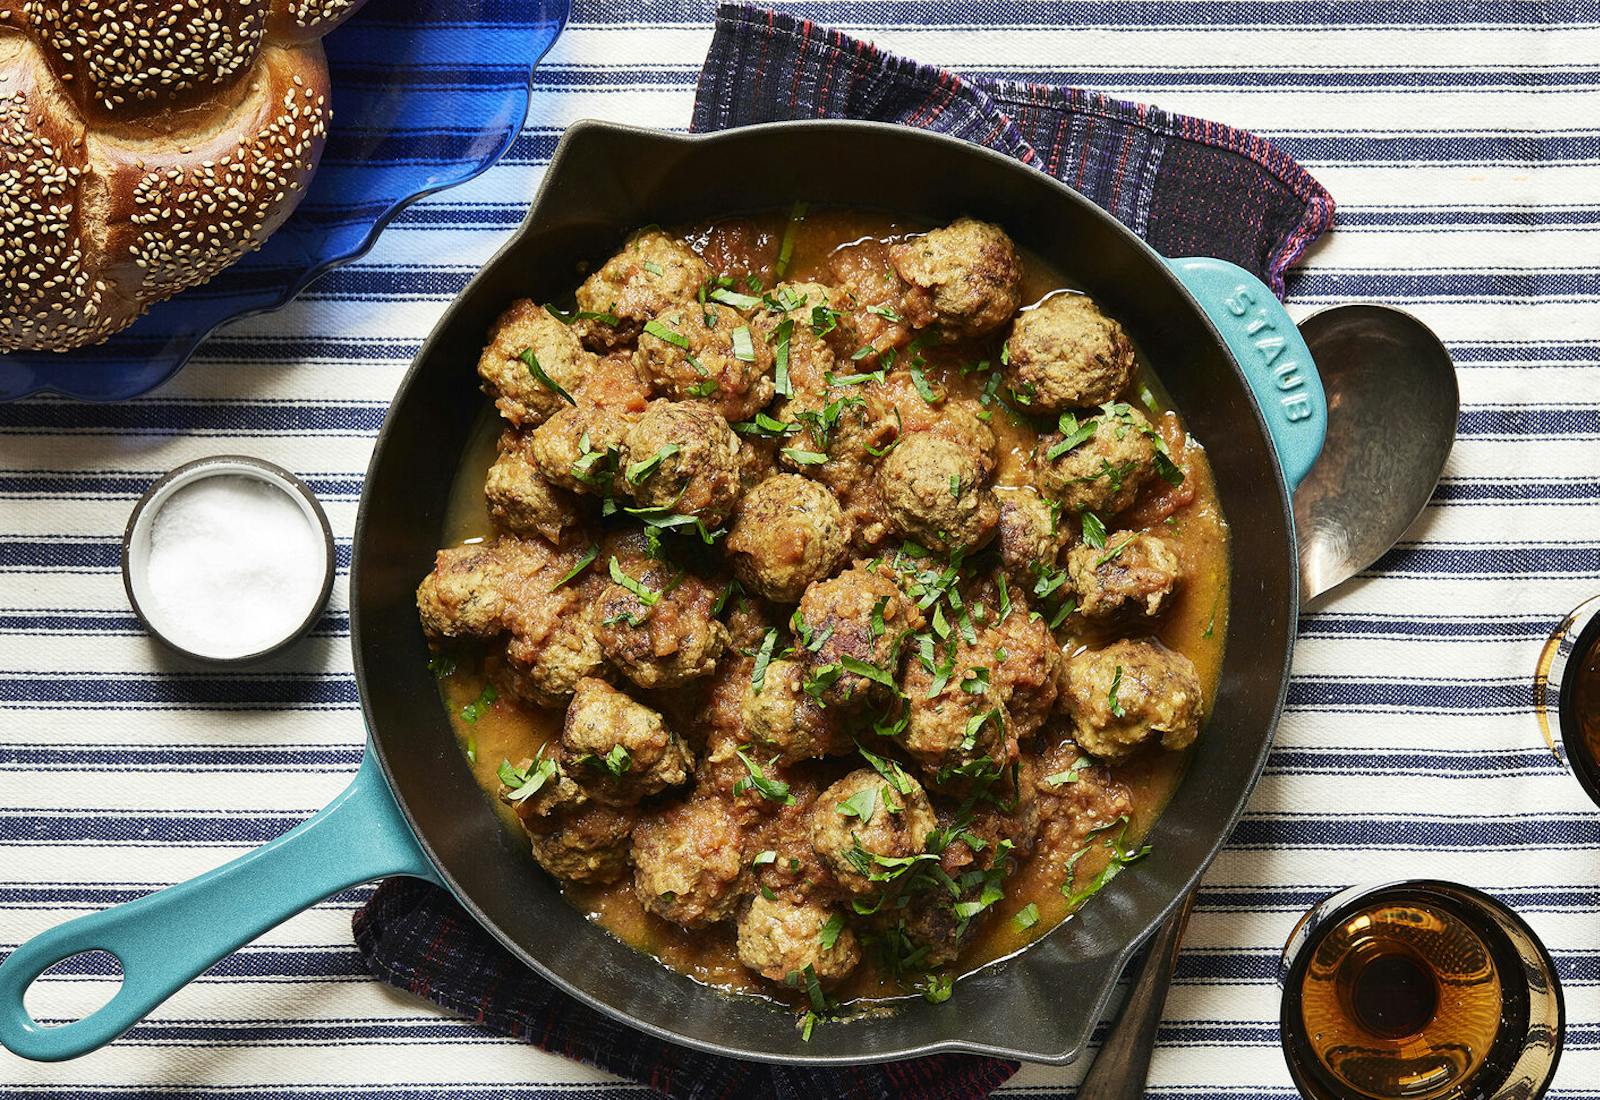 Meatballs with sliced parsley in cast iron skillet, seeded challah atop striped tablecloth.